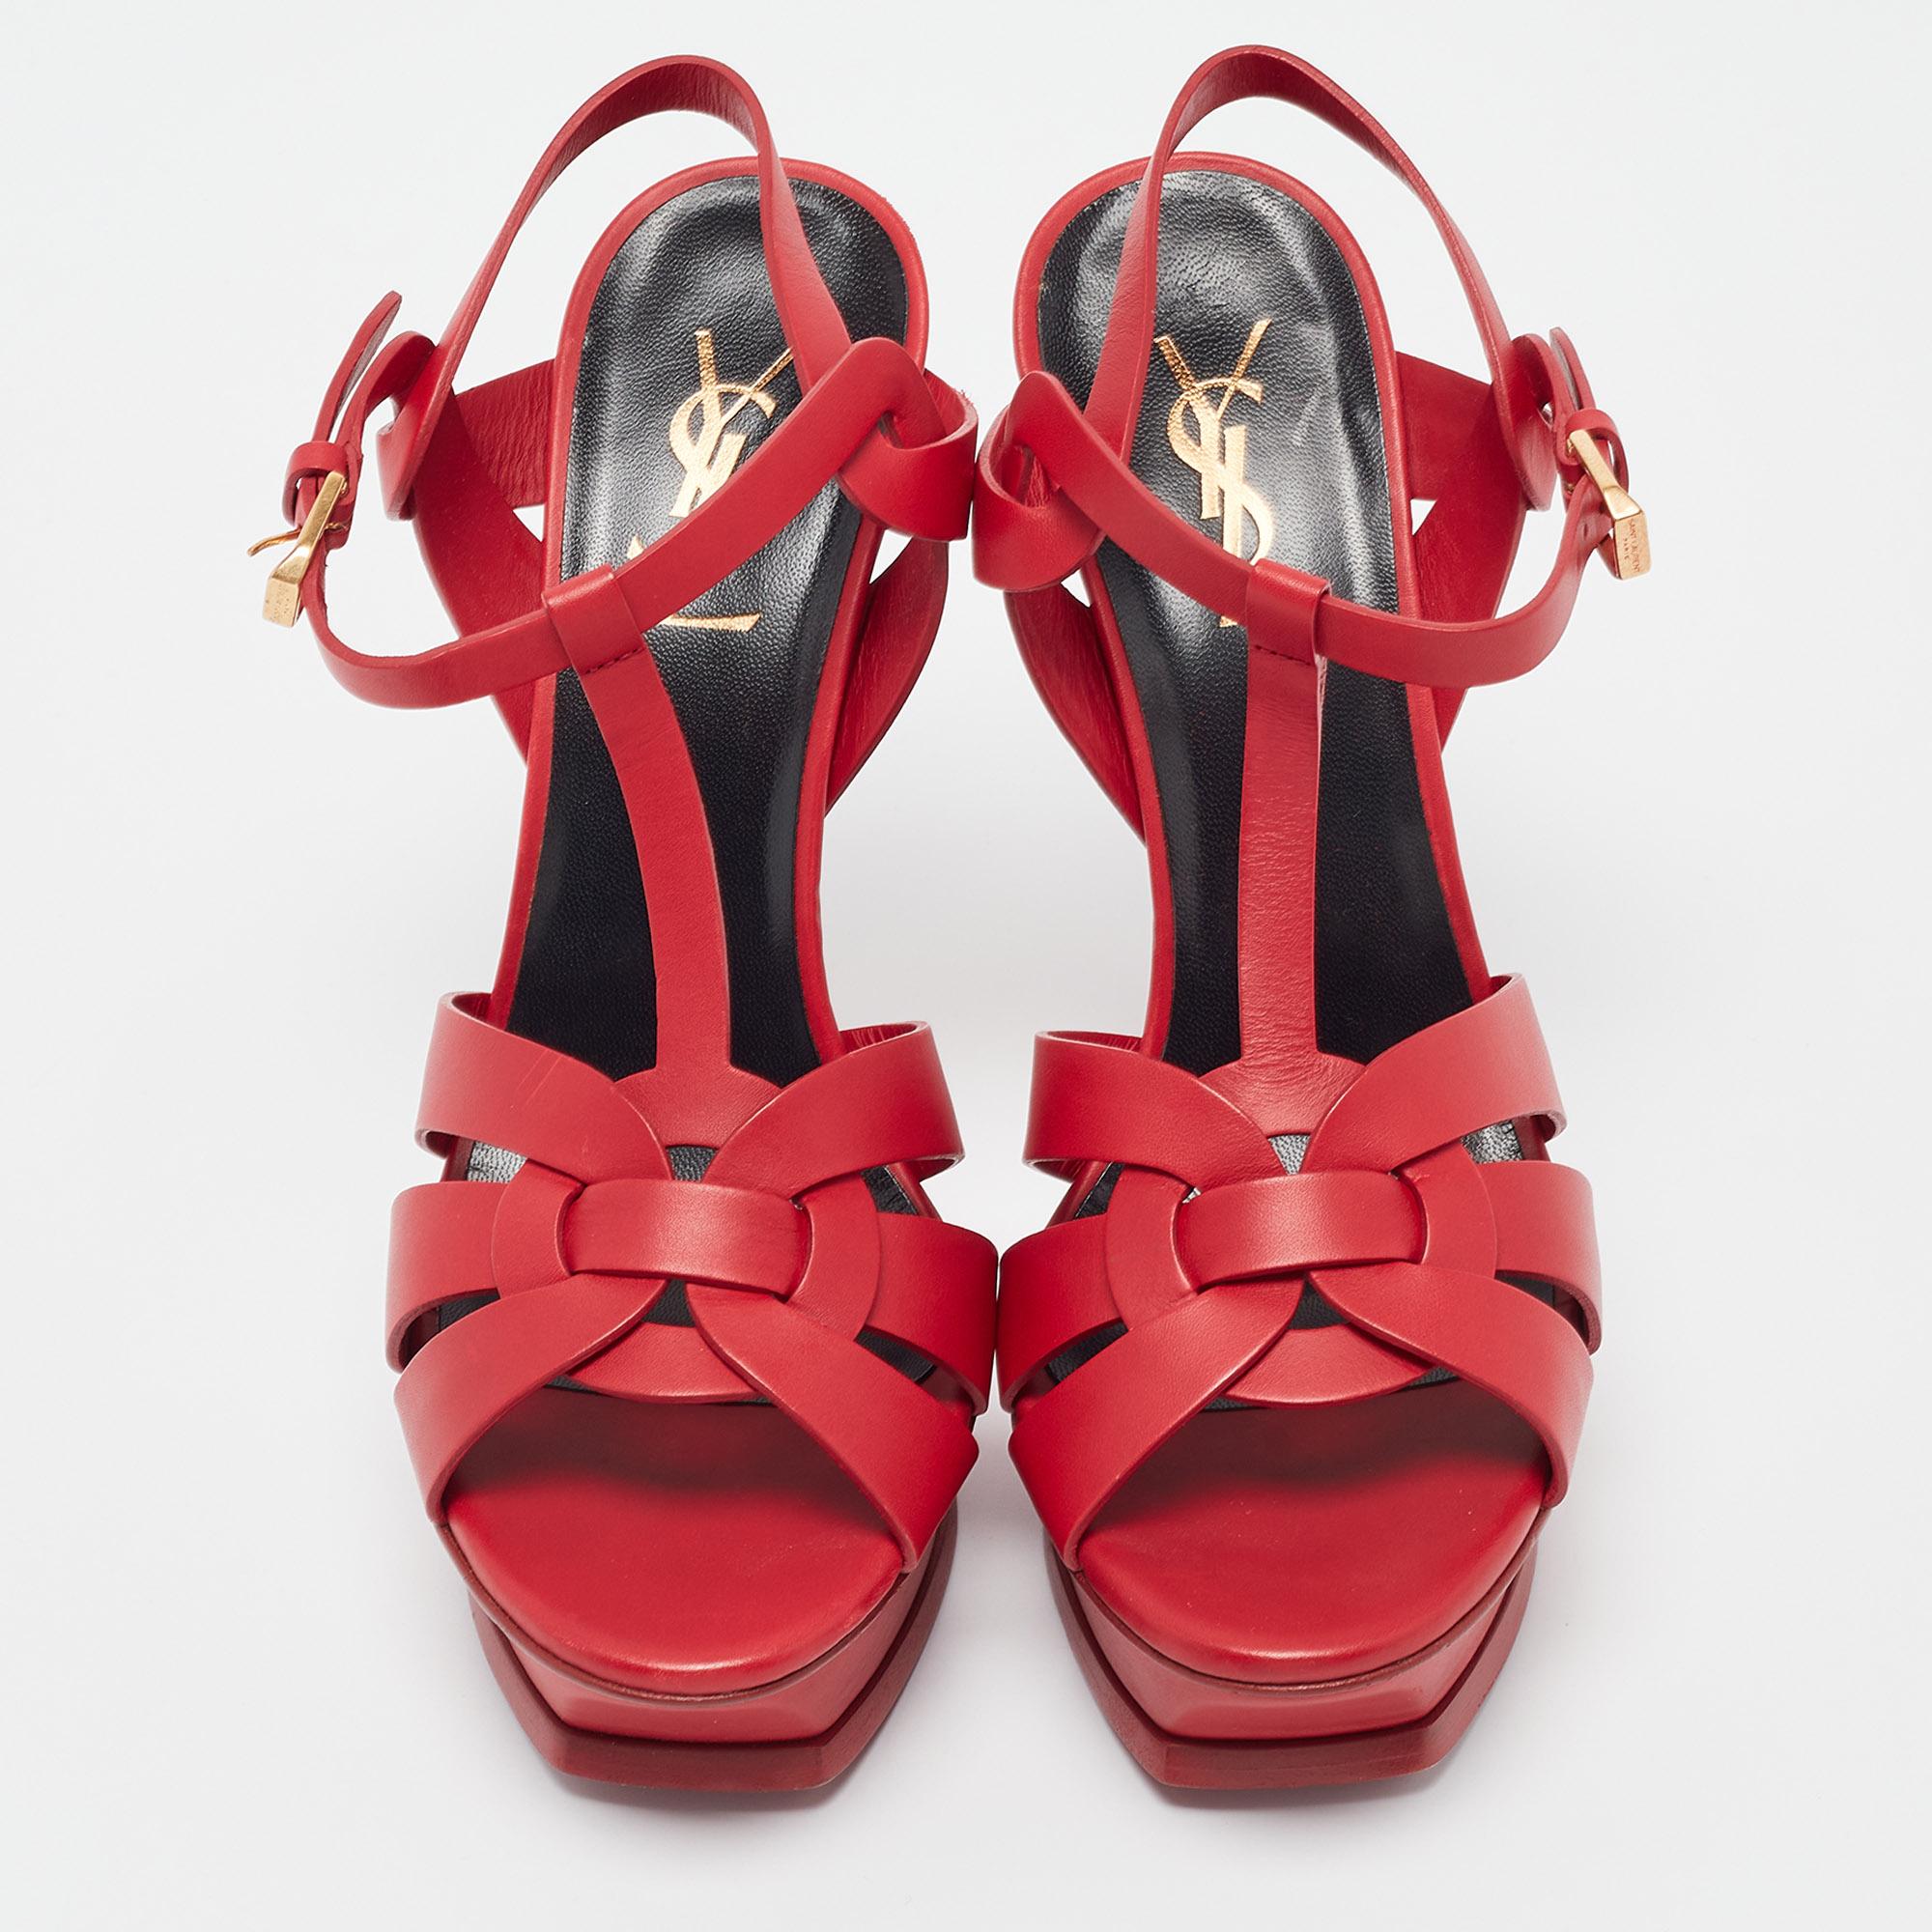 A timeless aesthetic and stellar craftsmanship in shoemaking are evident in these Saint Laurent platform sandals. From their interwoven construction using leather to the sturdy heels supported by platforms, these red-hued Tribute sandals can be